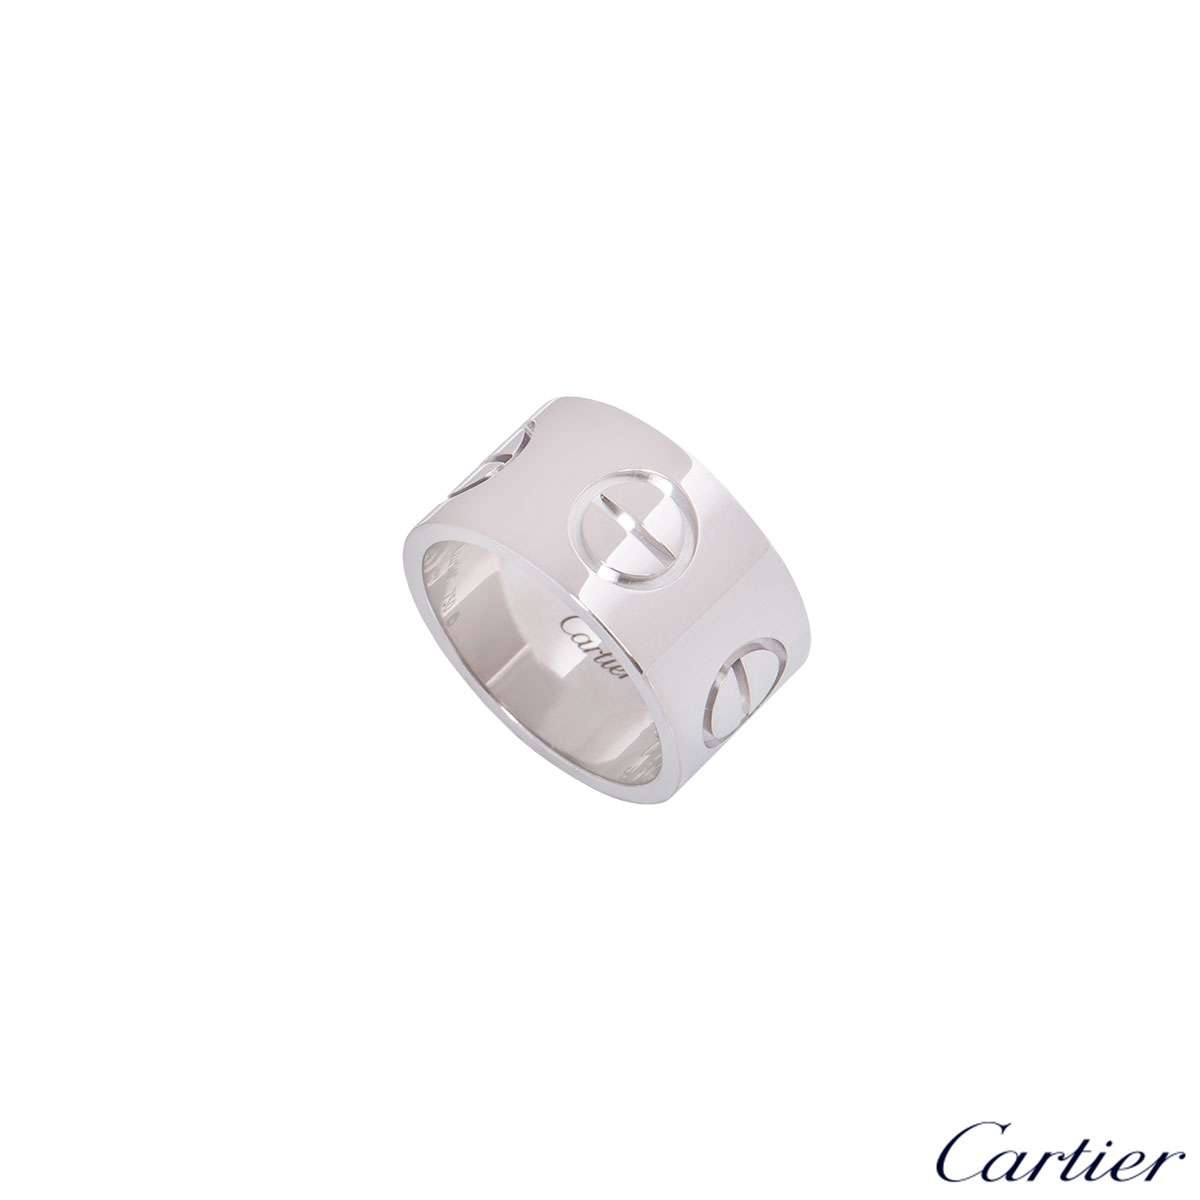 Cartier White Gold XL Love Ring Size 54 